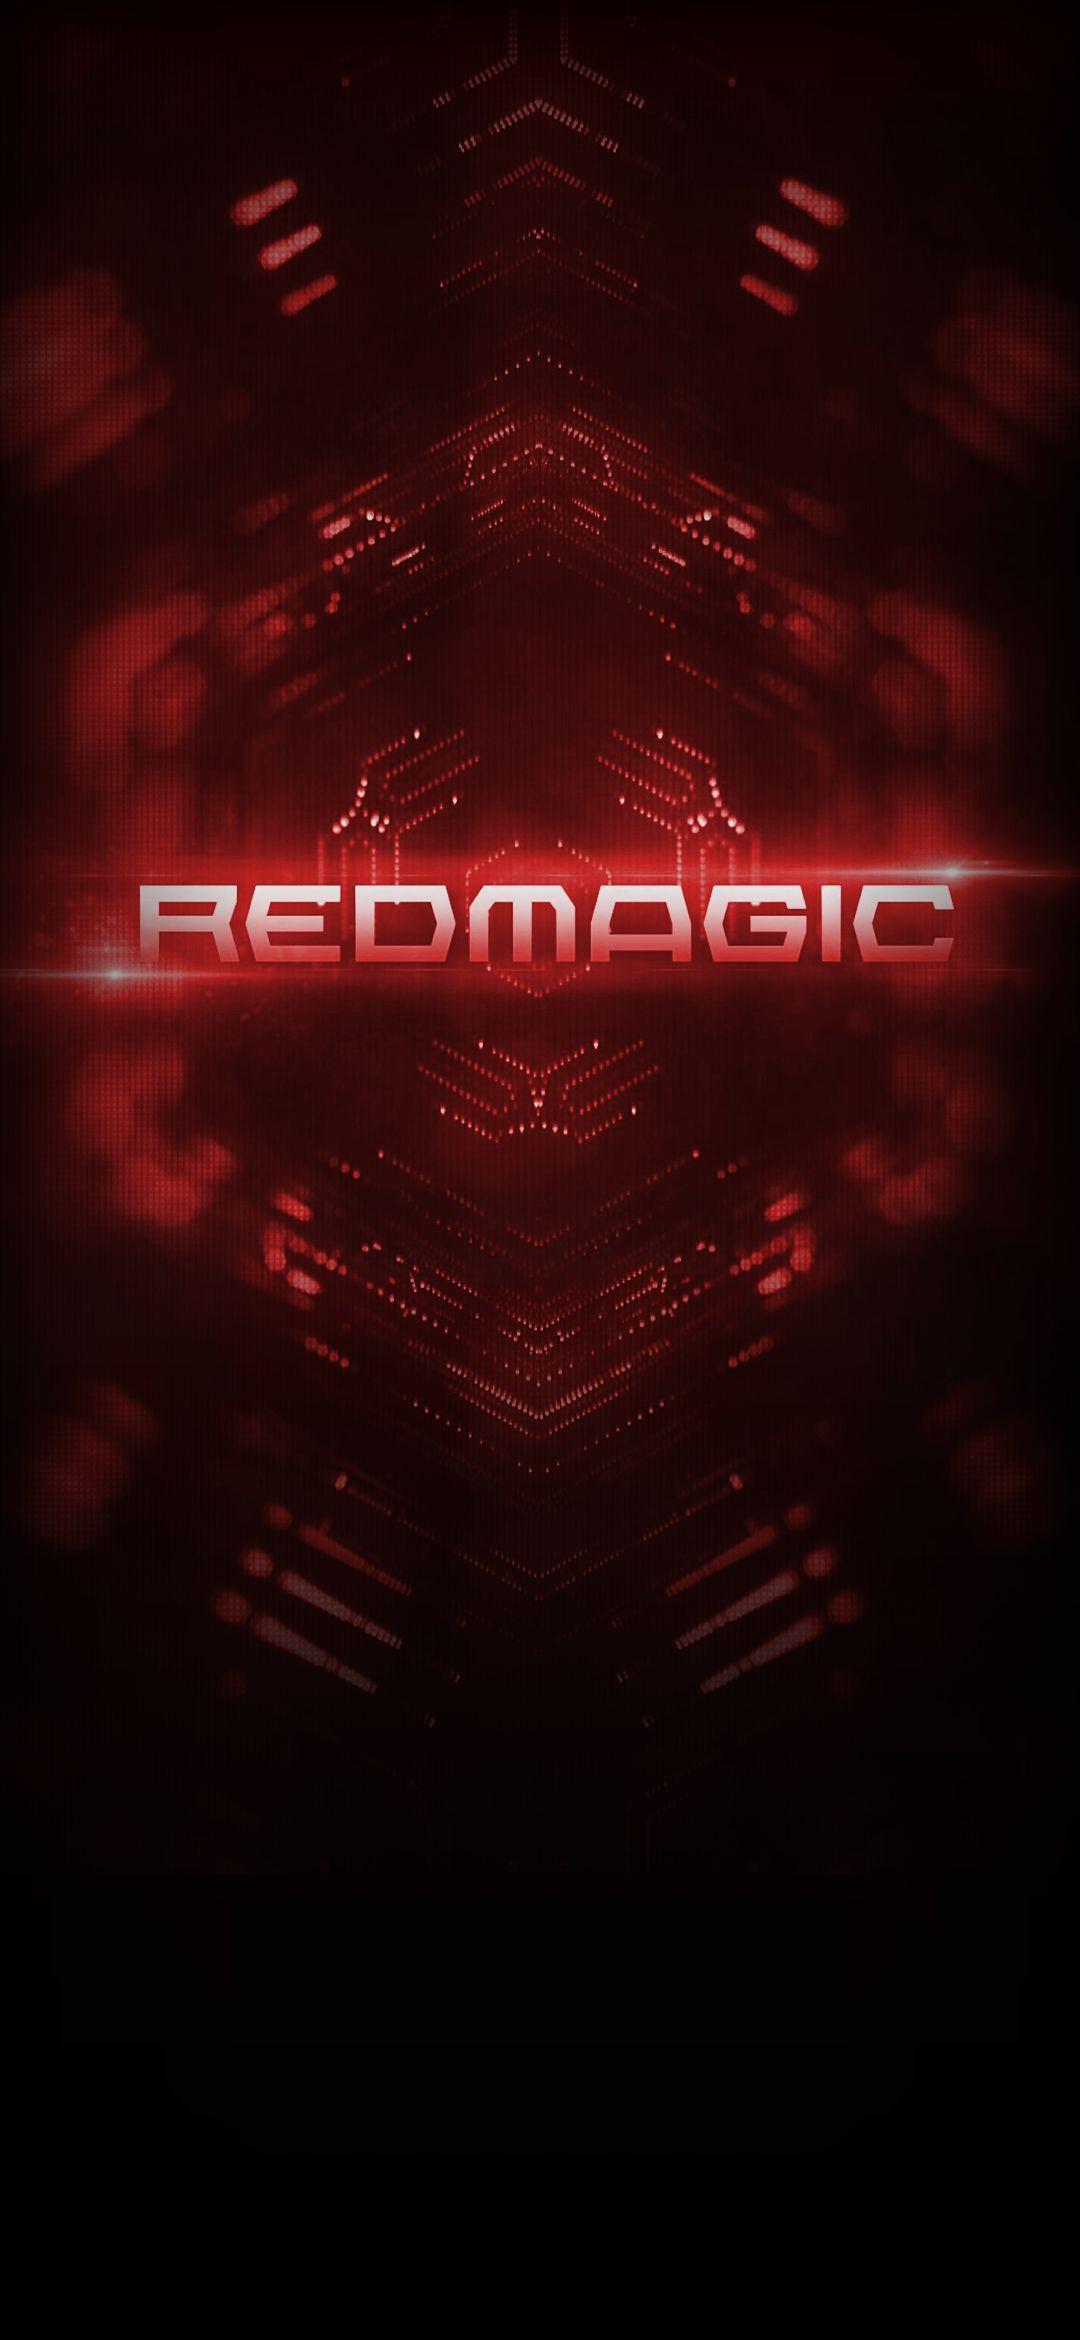 Wallpaper red magic being images for desktop section фантастика   download